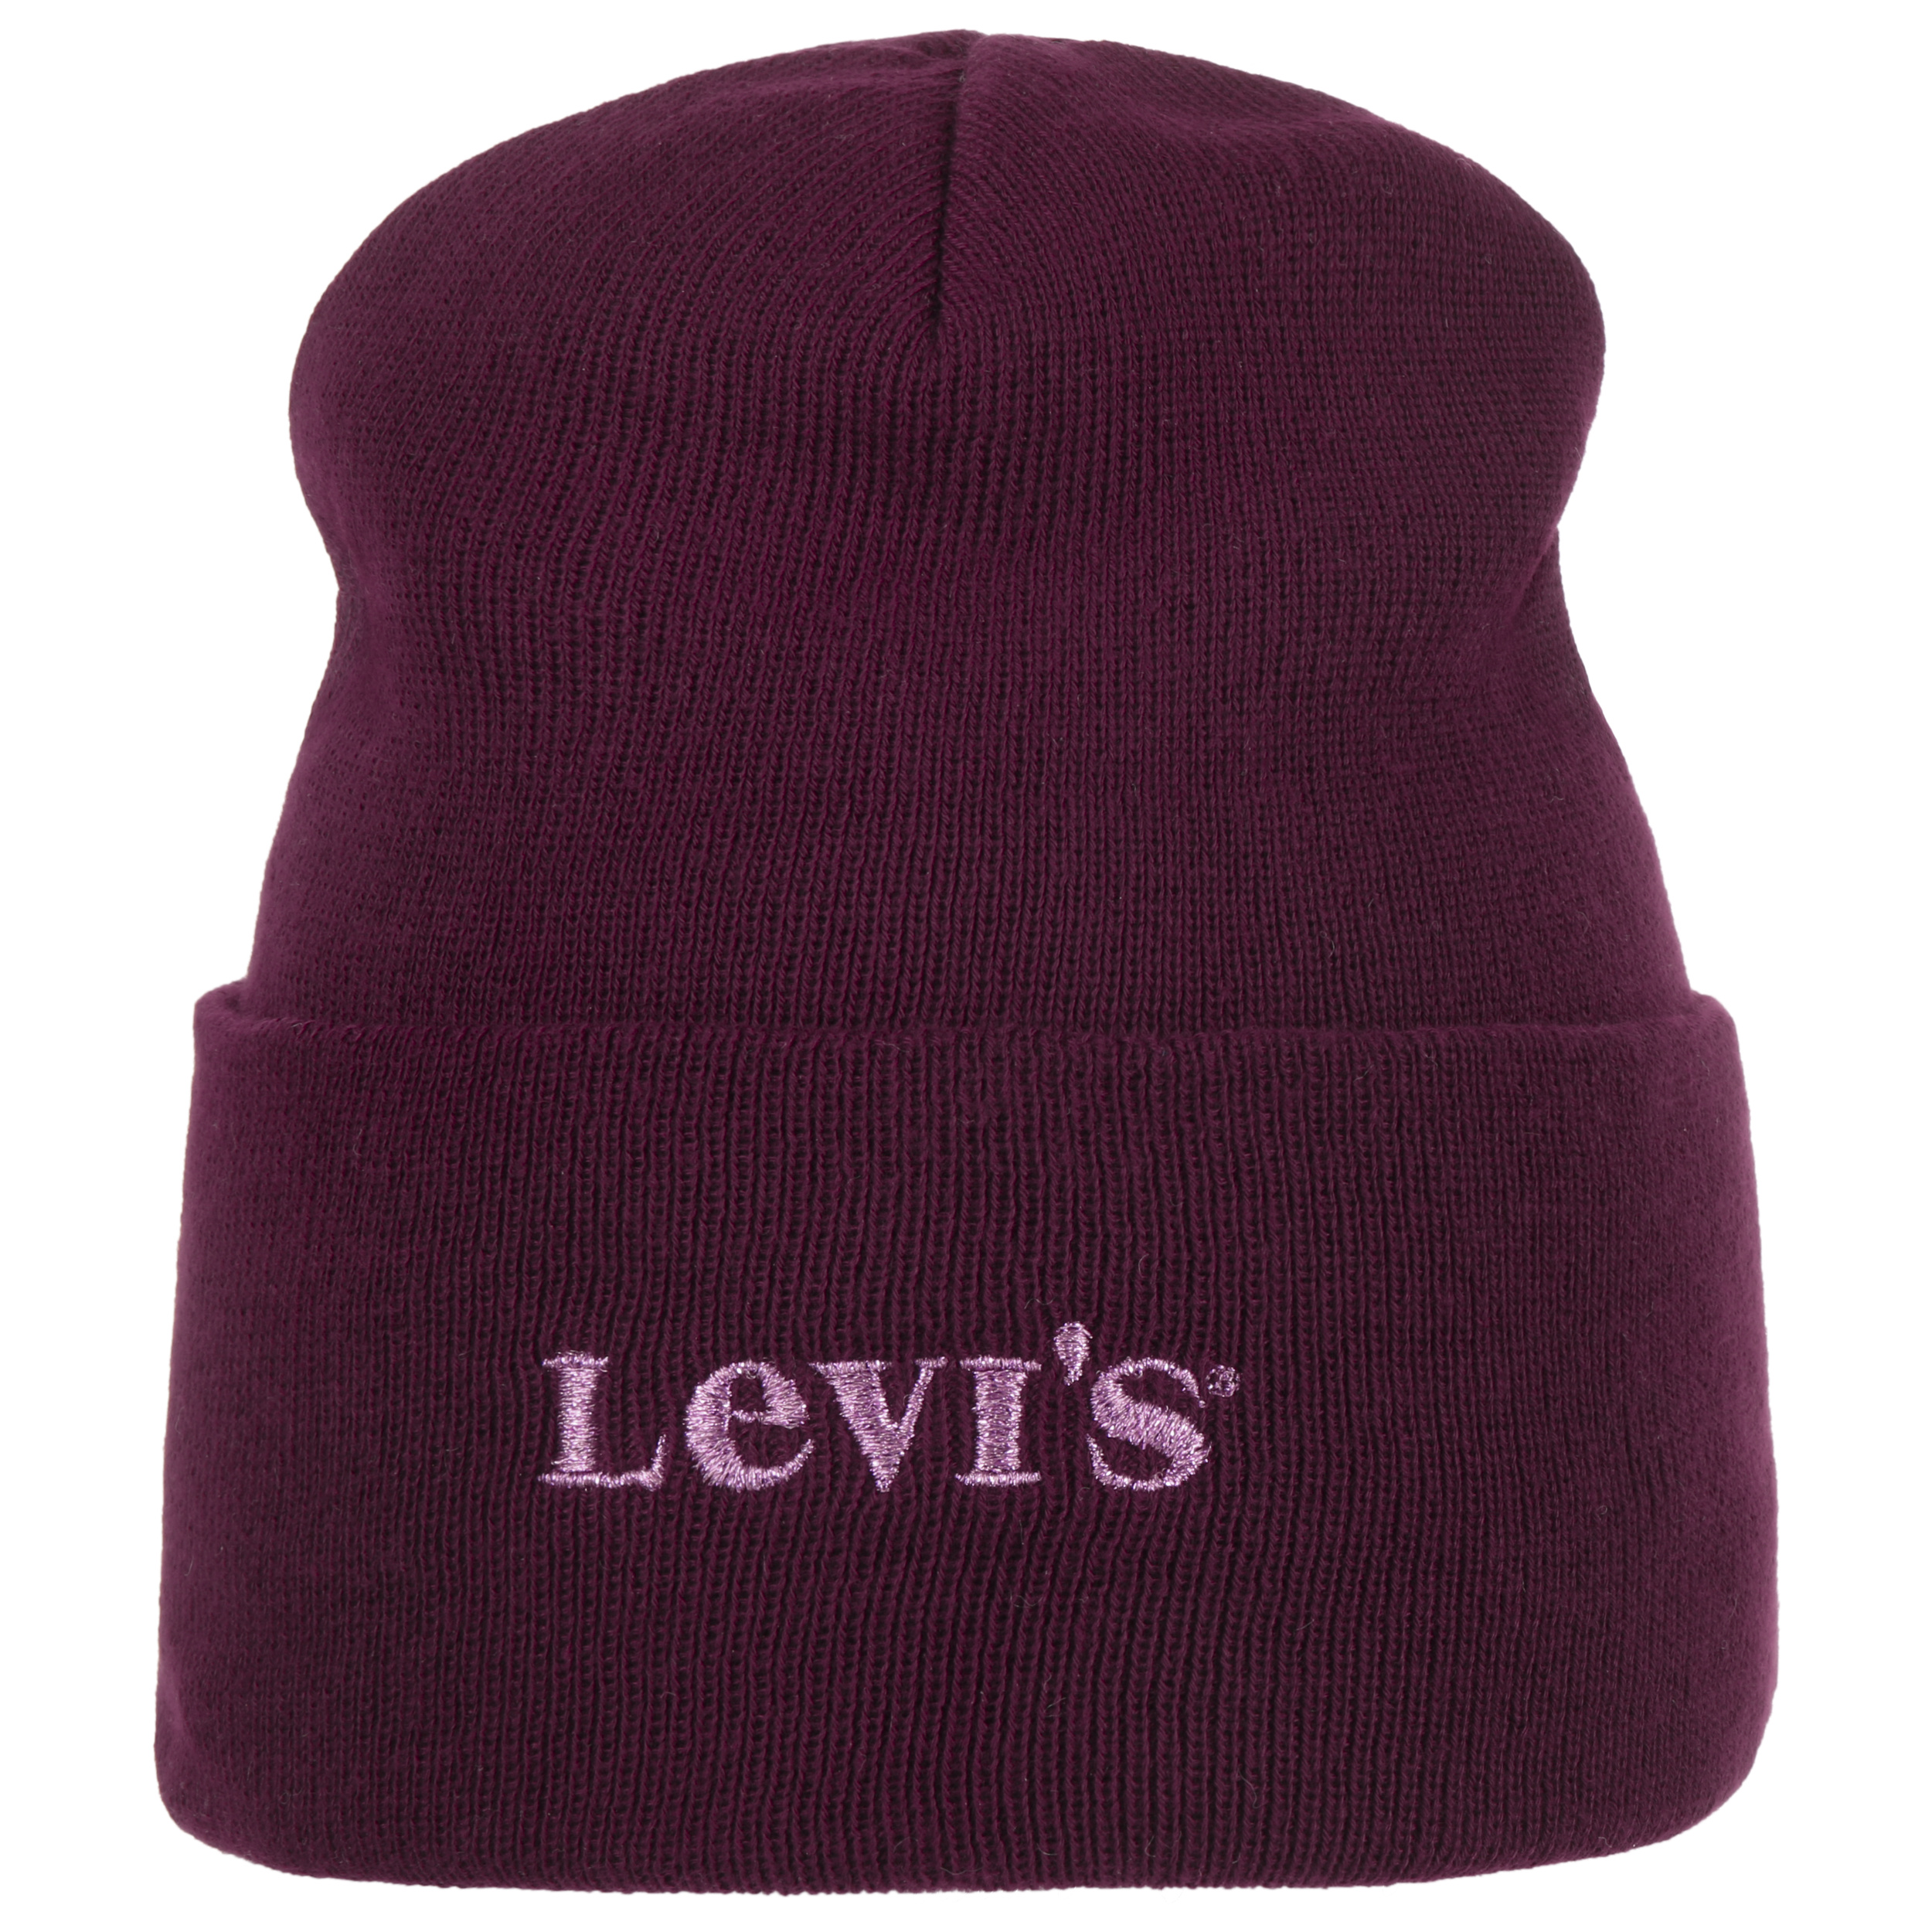 Recycled Beanie Hat by Levi´s - 29,95 €